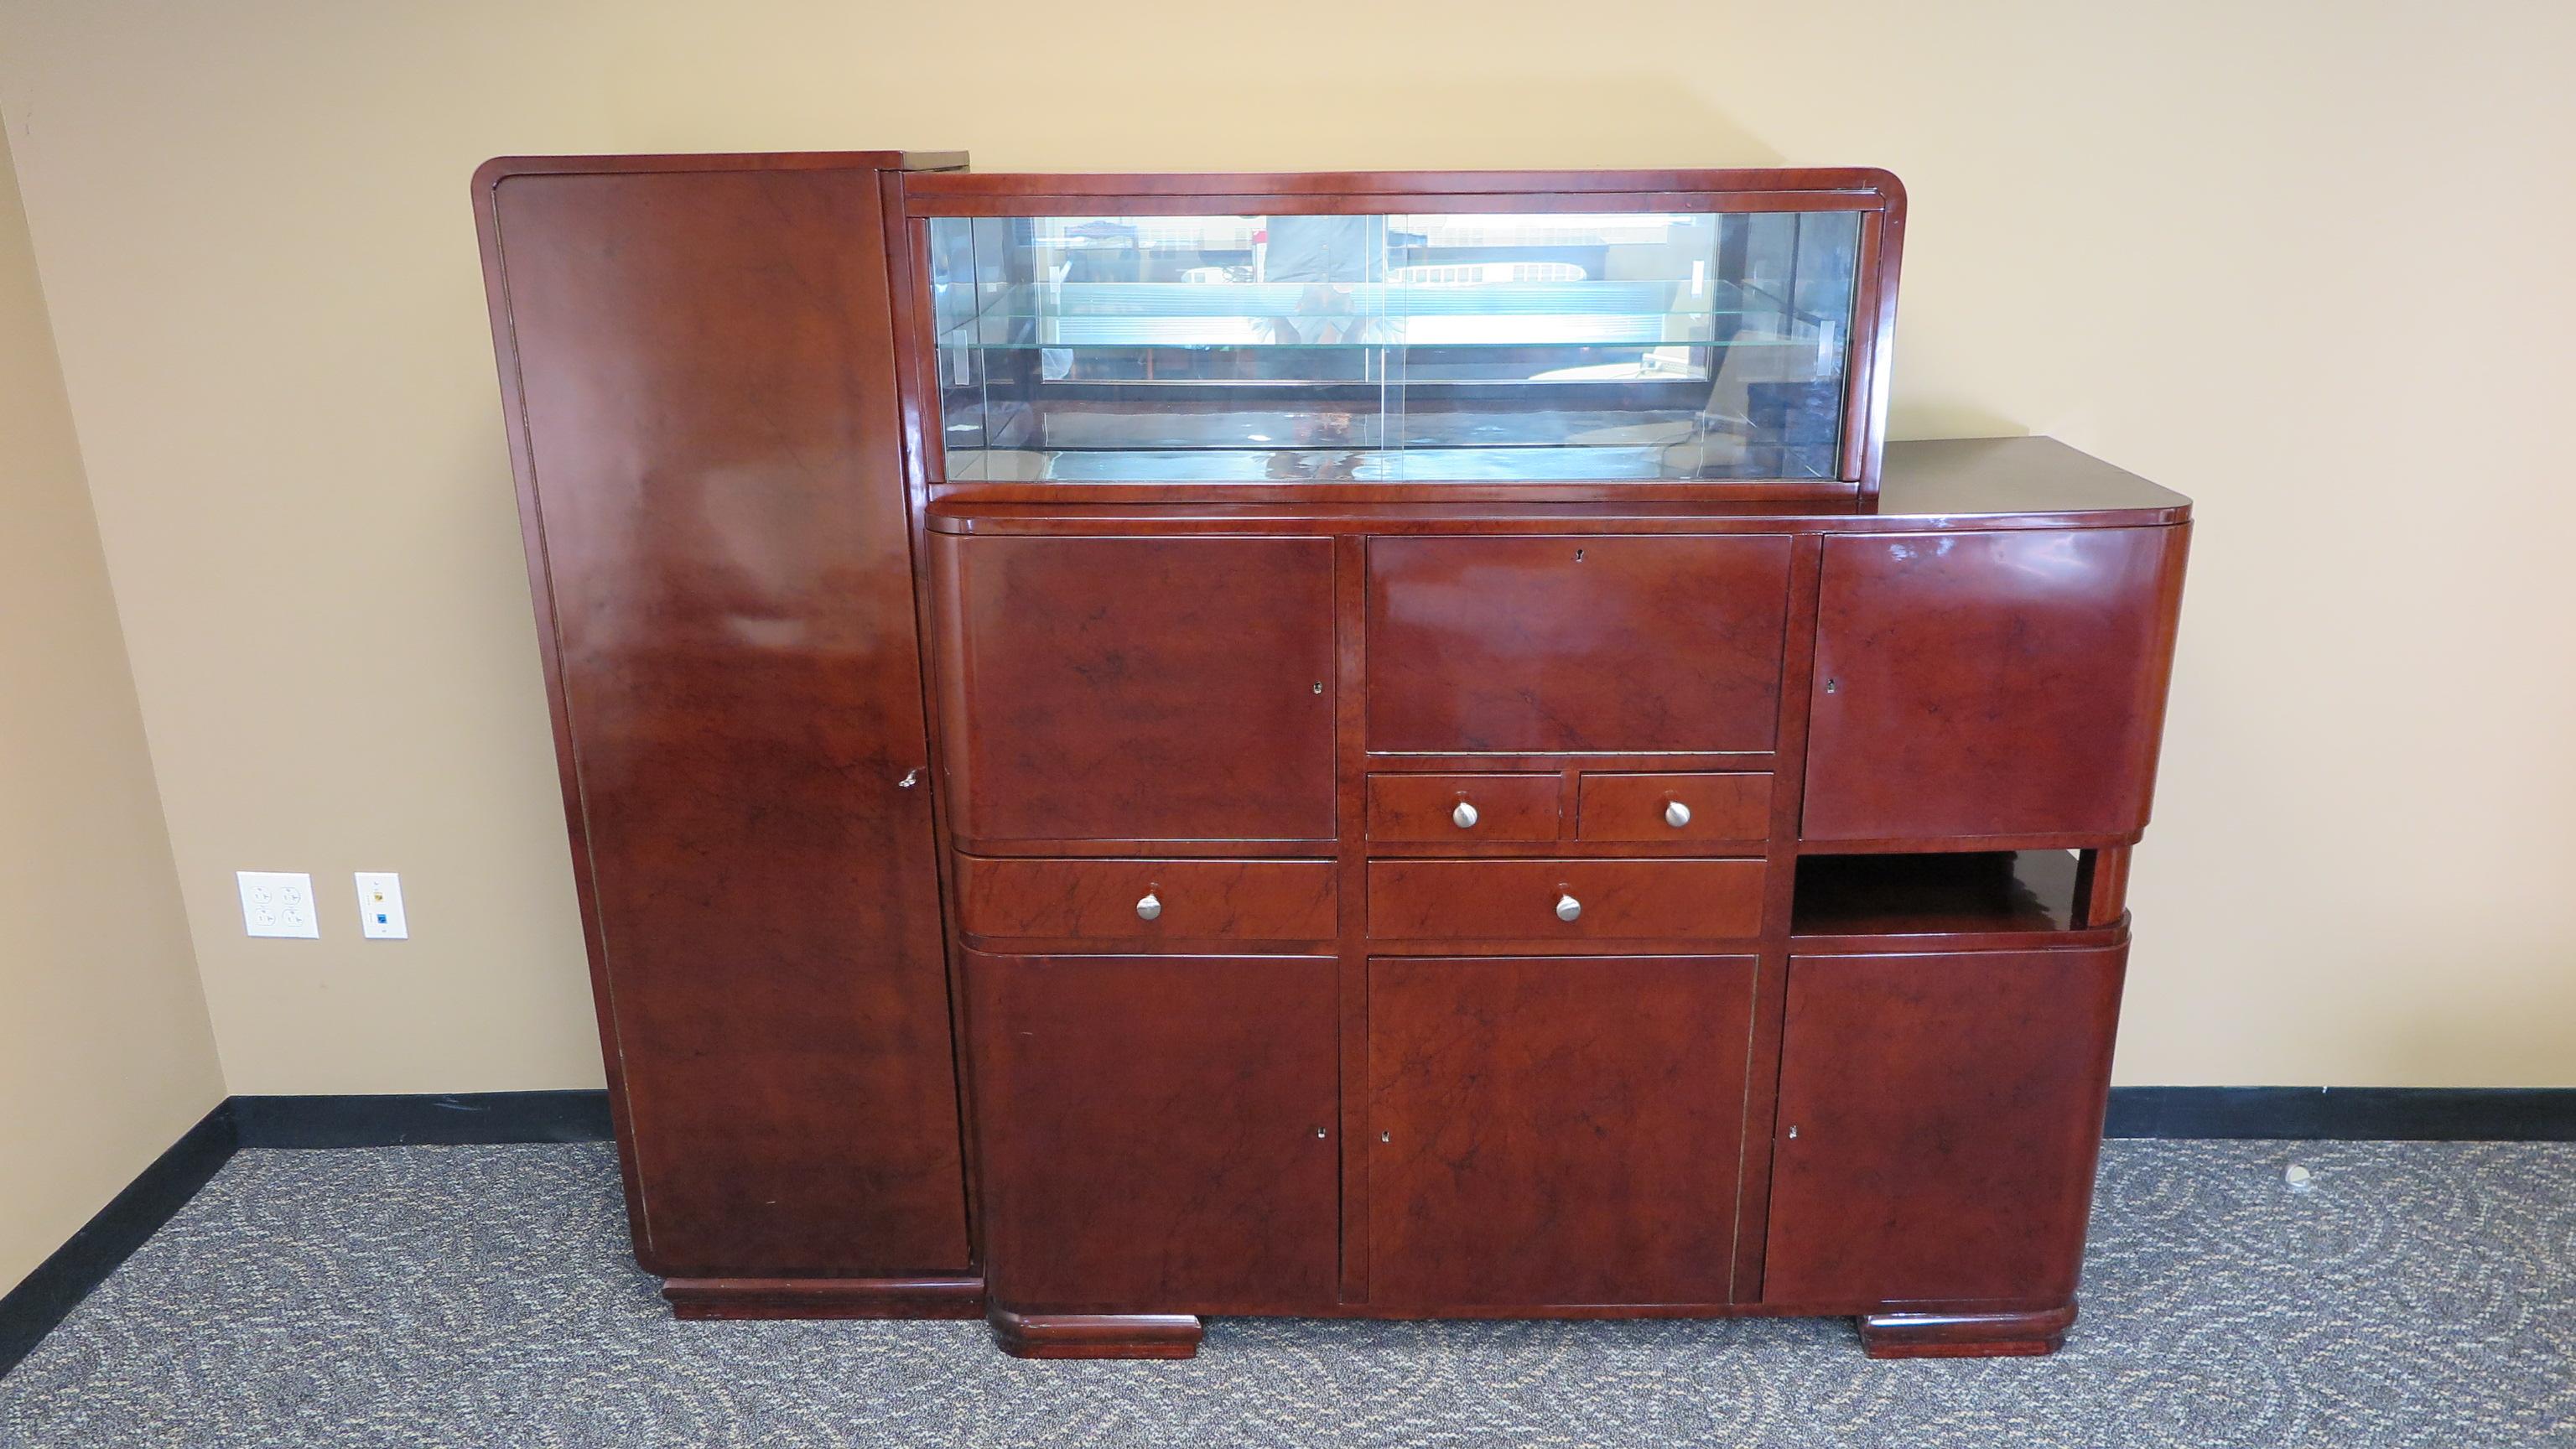 Period art deco sideboard, art deco bar cabinet. An excellent art deco sever having bar compartments, and lots of storage with a glass display case on the top.
Rounded corners in true art deco style. Very good condition.